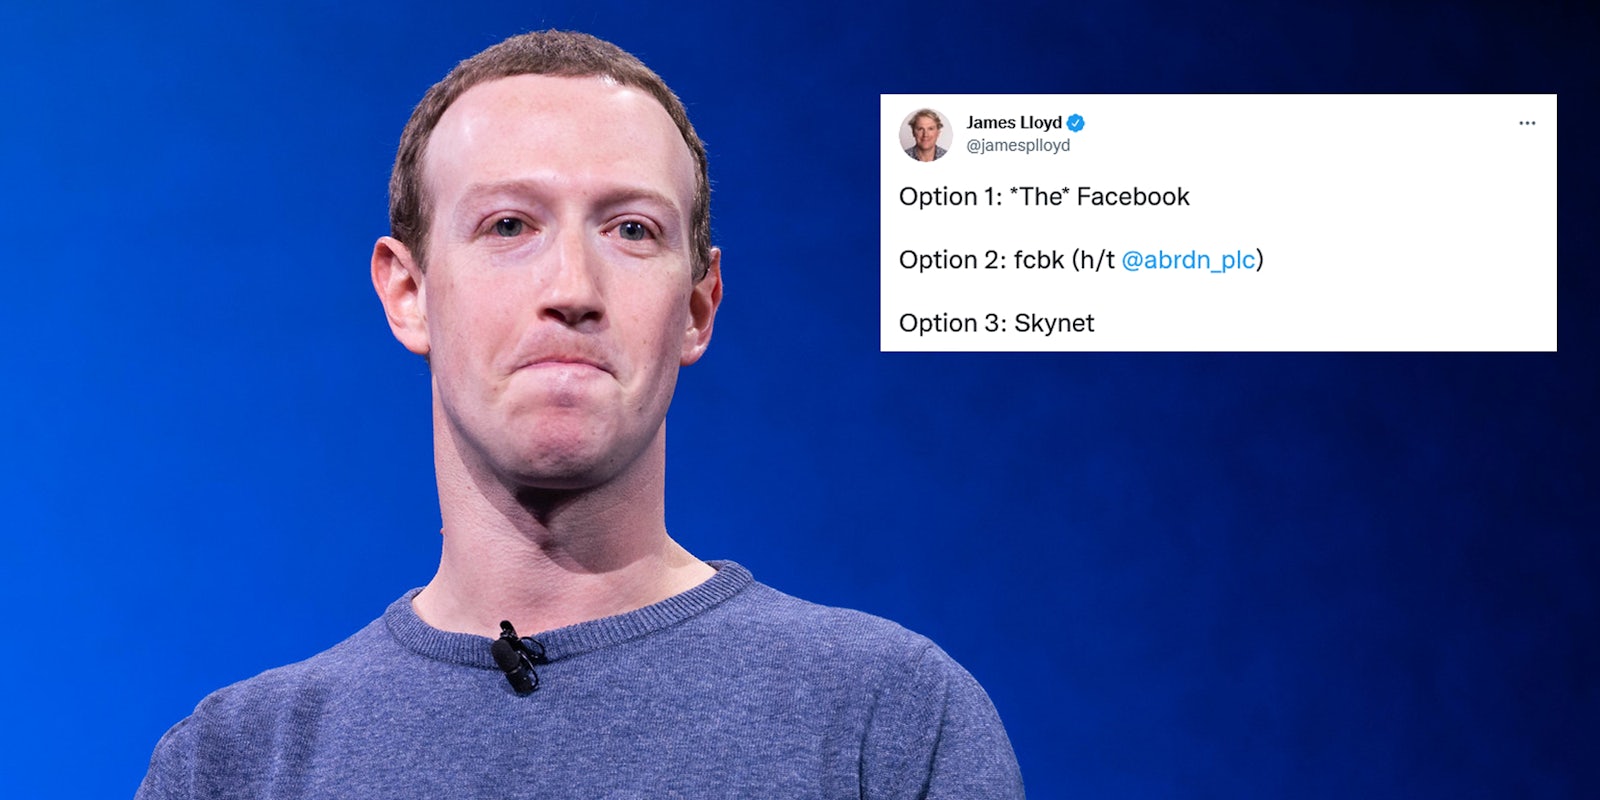 Facebook CEO Mark Zuckerberg next to a tweet mocking the reports that the company will go through a rebranding.